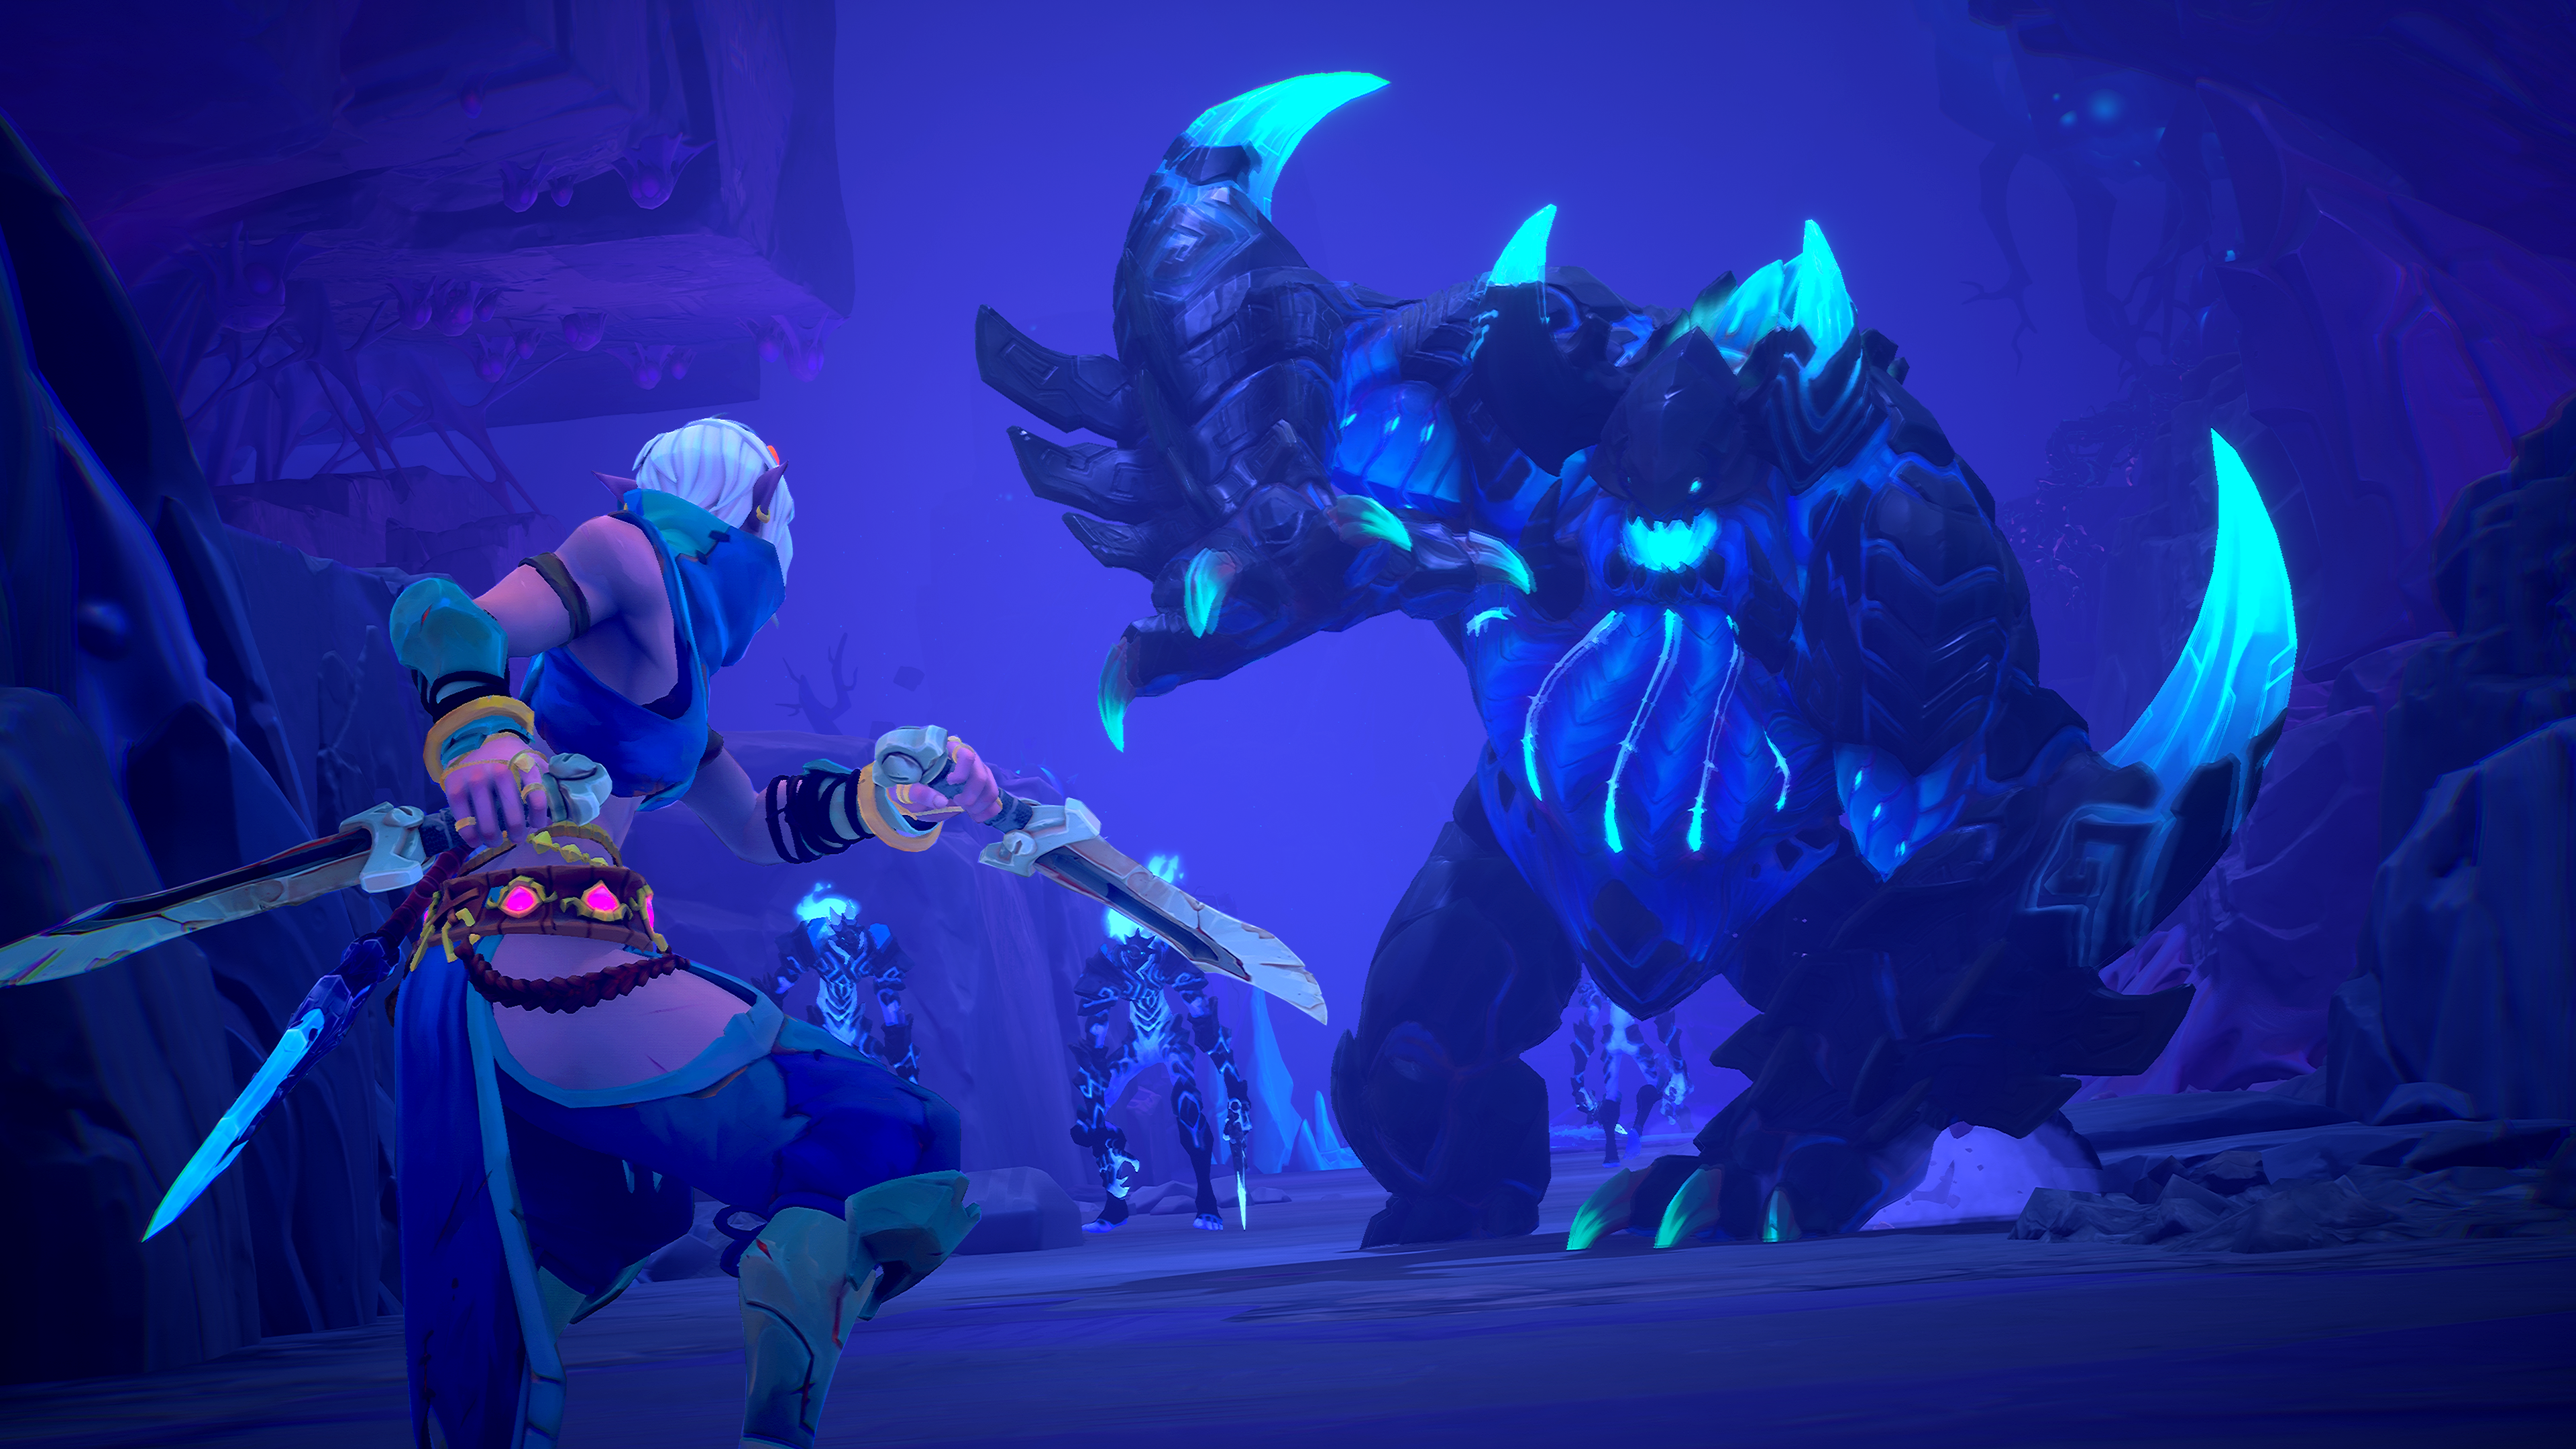 Fast, action-packed and endlessly replayable: This MMO from the teams behind Warframe and Darksiders is a feast of co-op dungeoneering